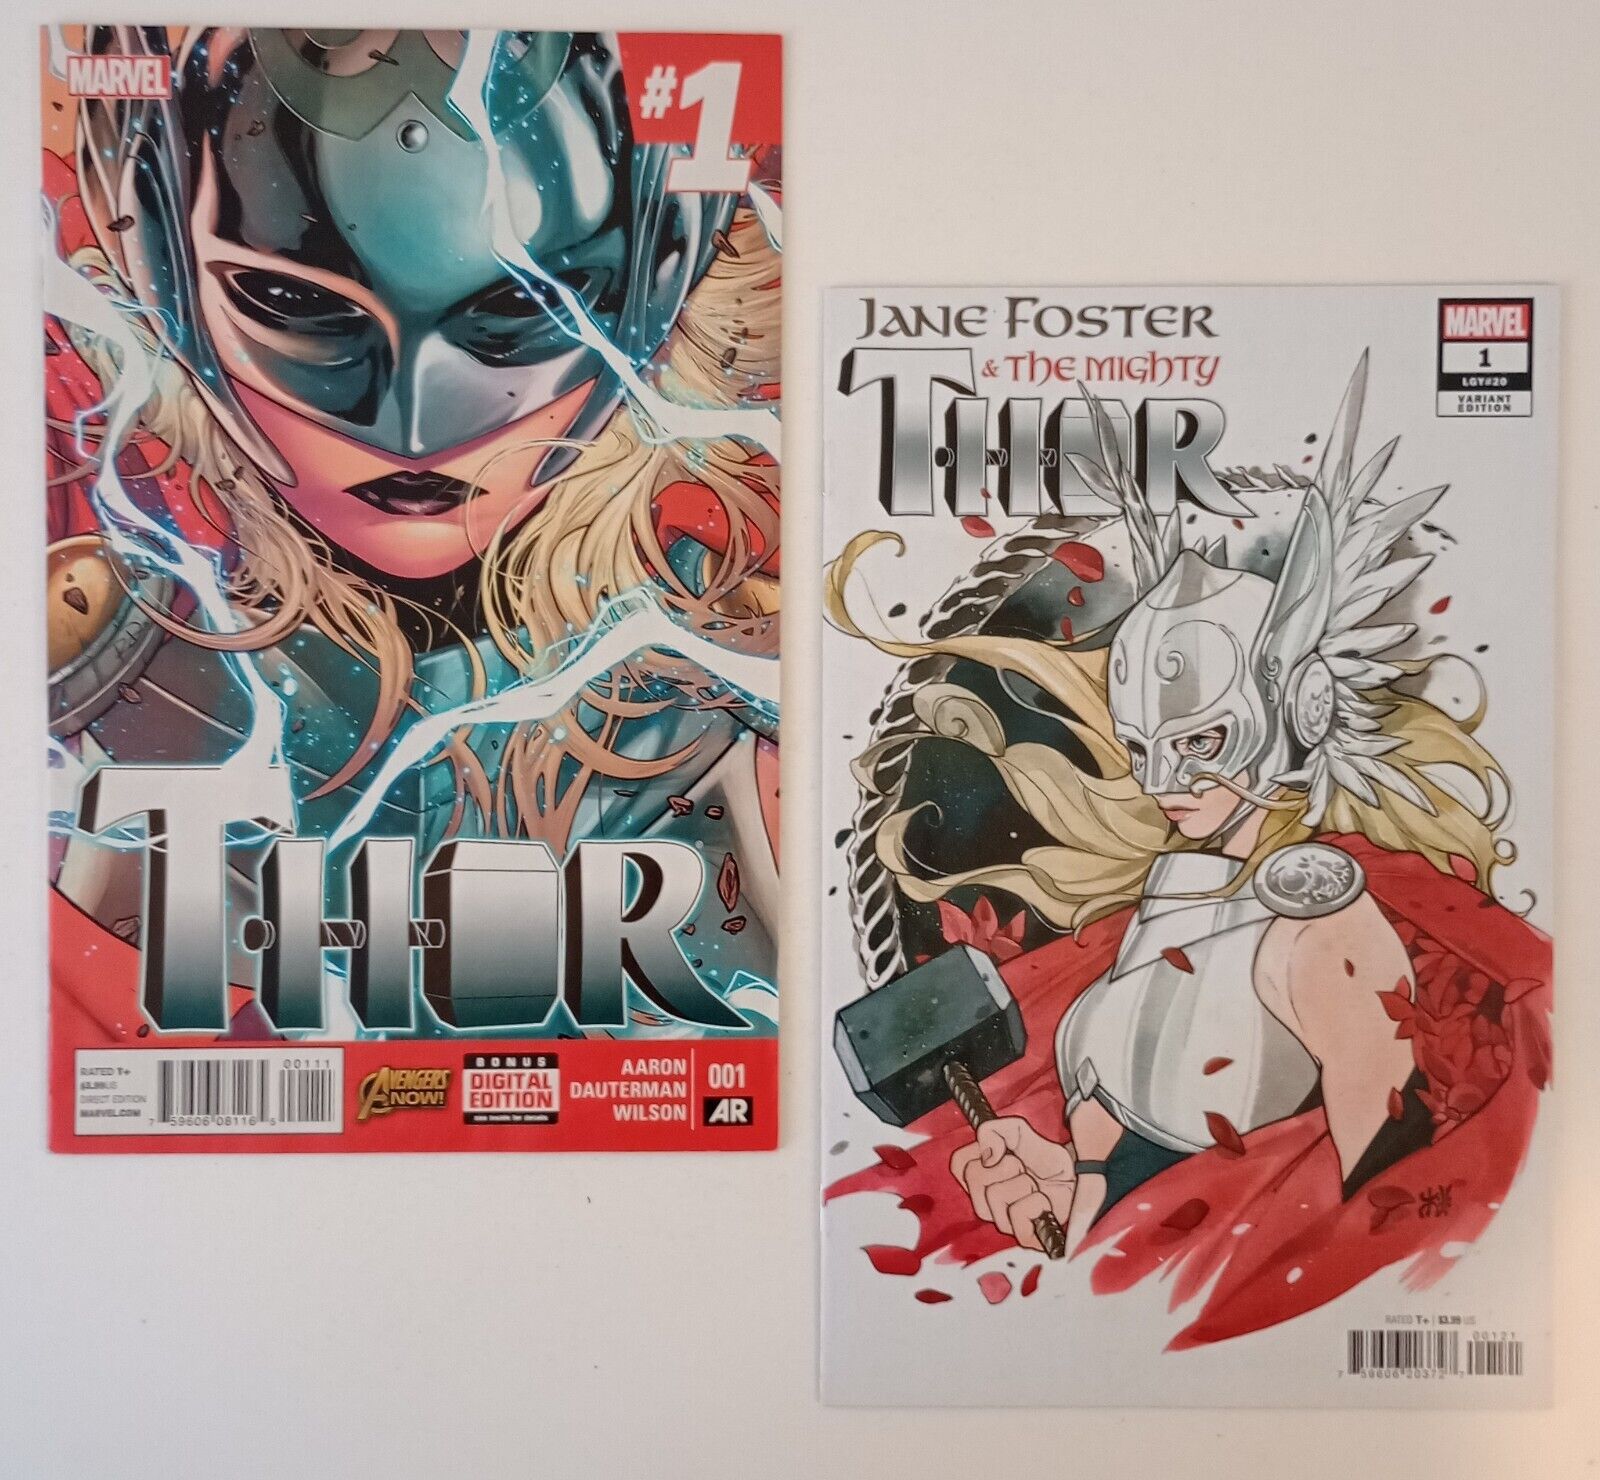 Thor #1 & Jane Foster THOR#1 (1st Appearance of Jane Foster as Thor) 2014